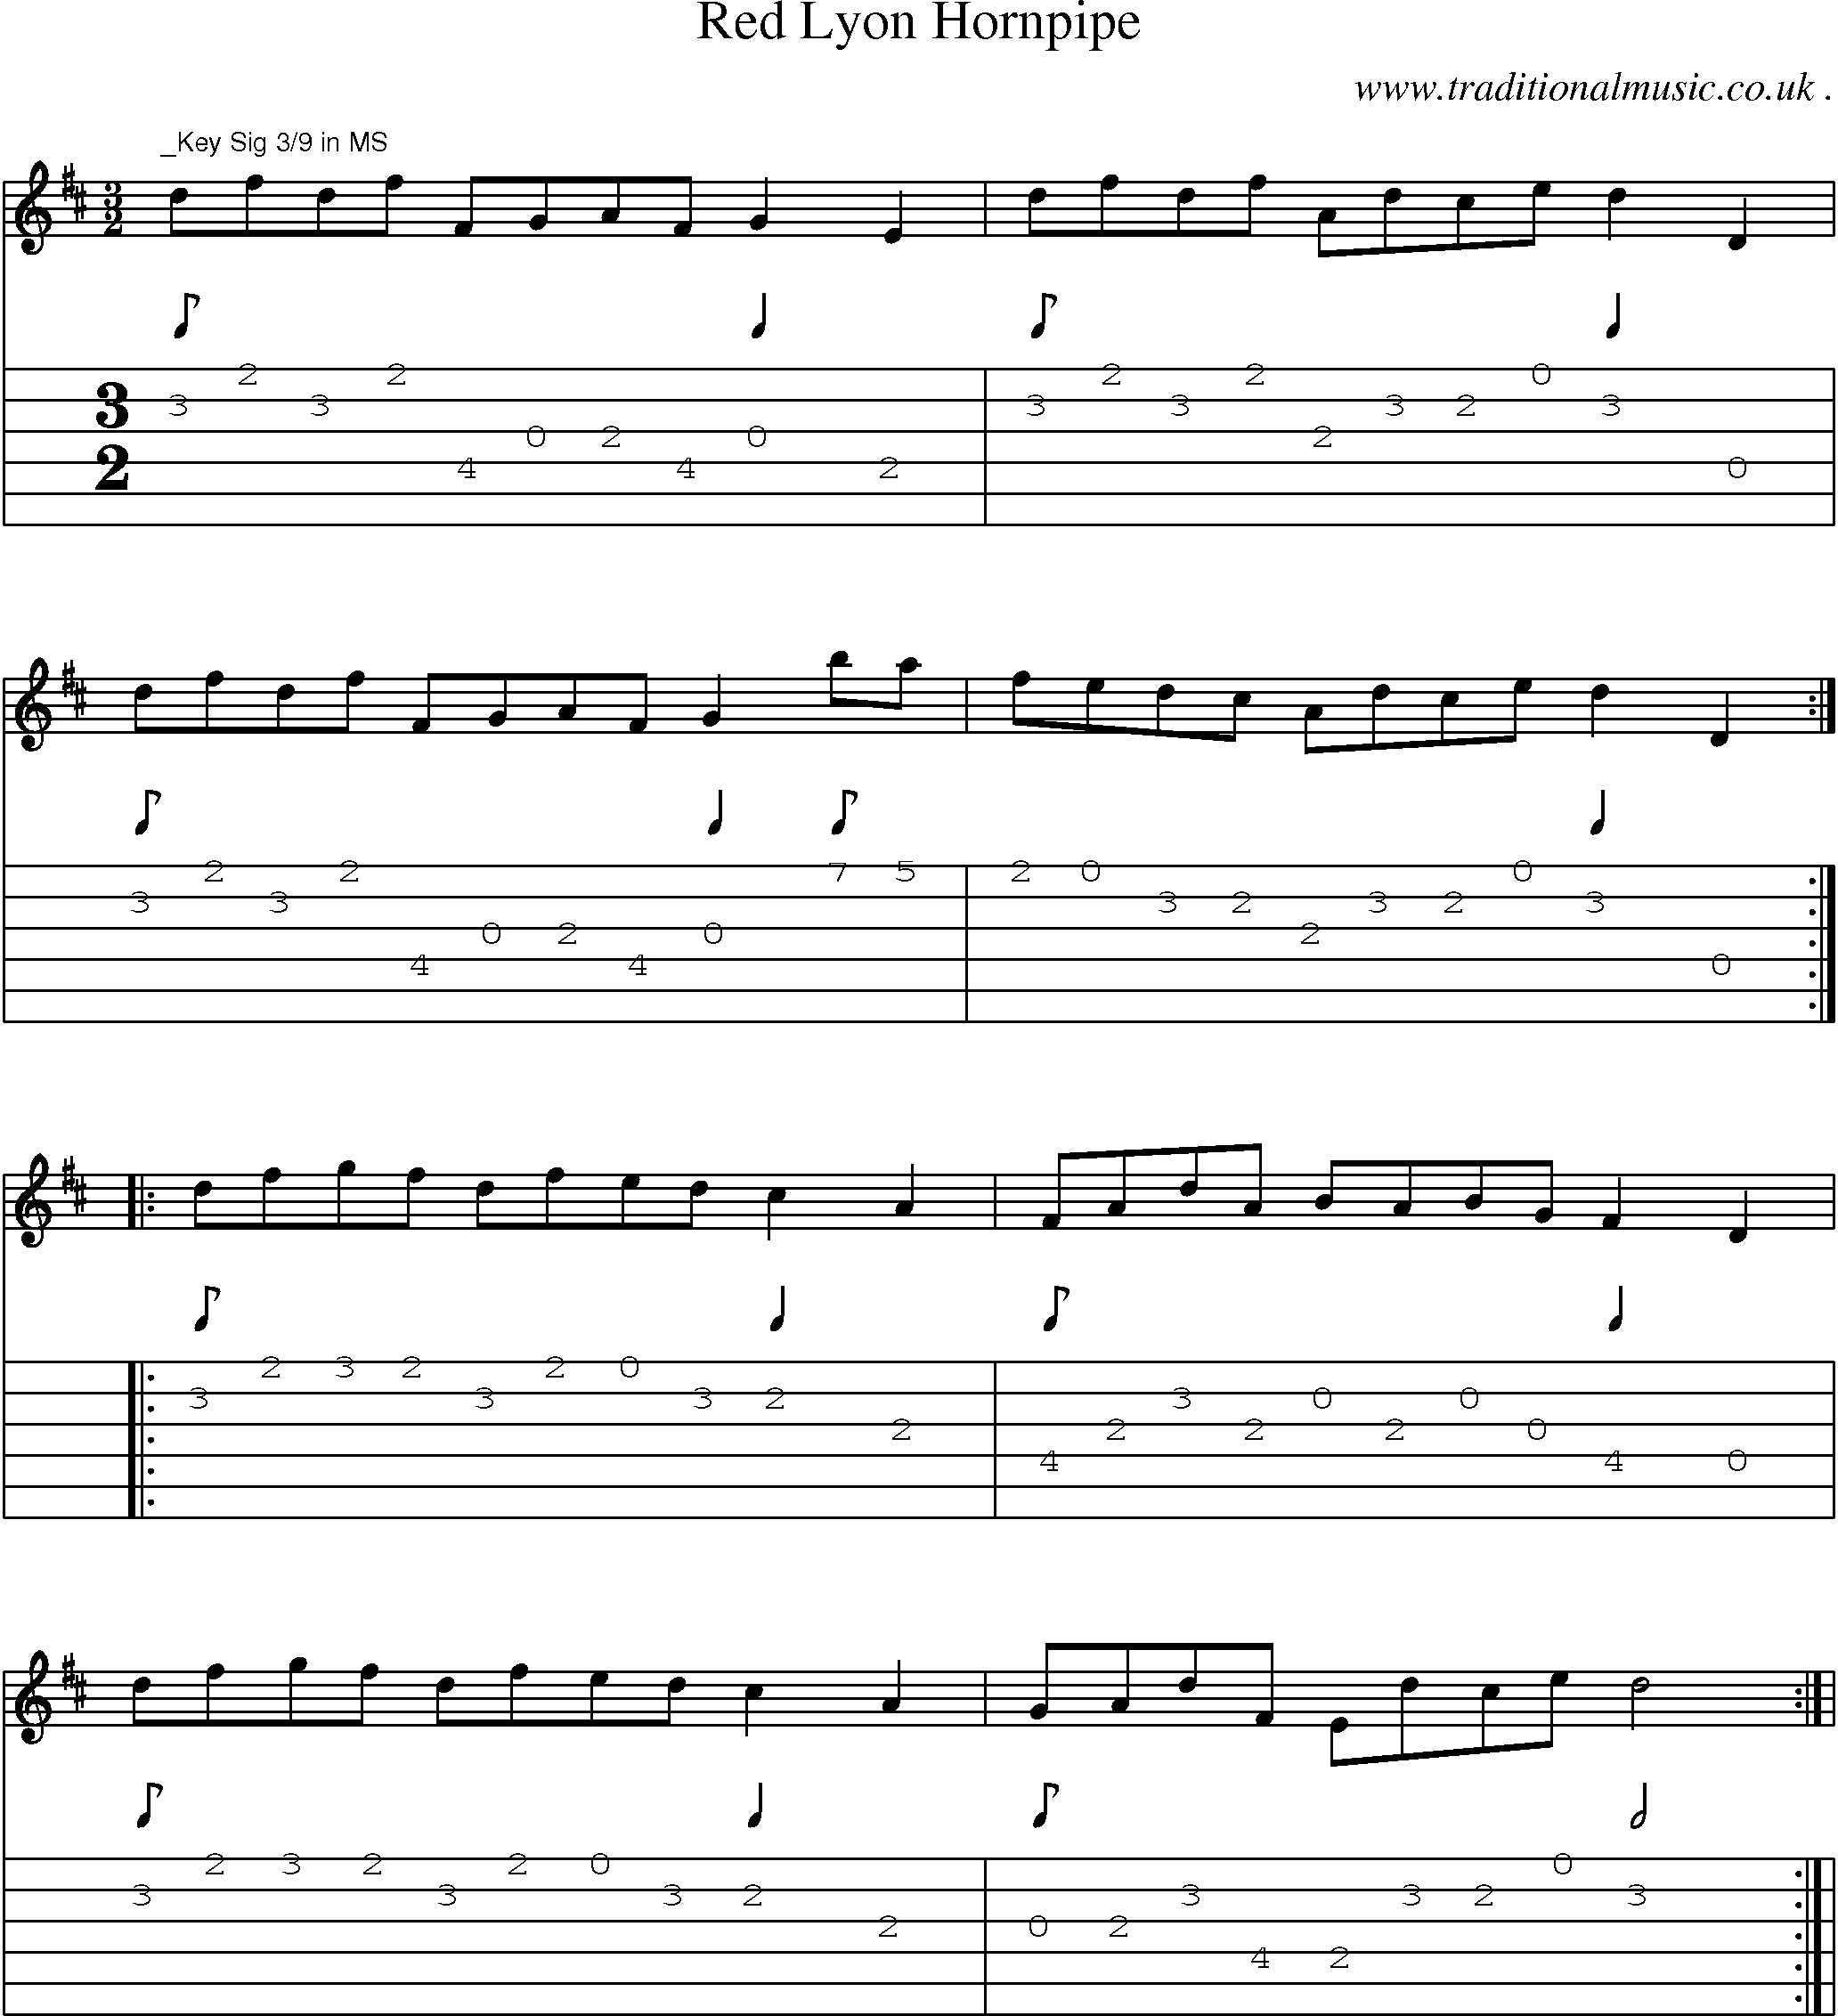 Sheet-Music and Guitar Tabs for Red Lyon Hornpipe